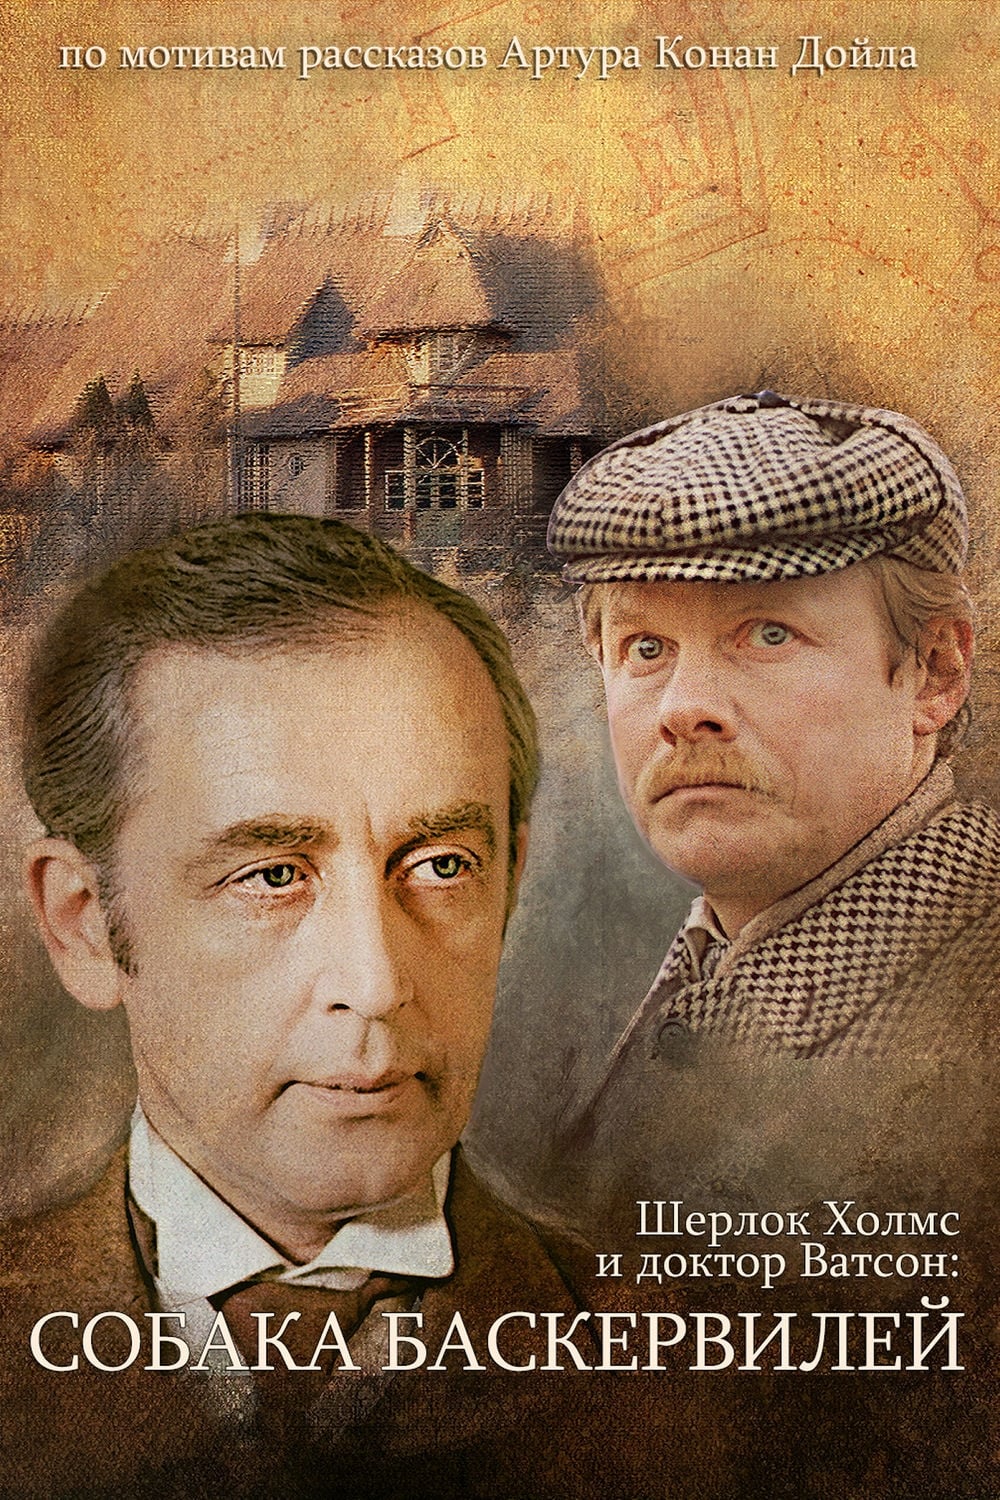 The Adventures of Sherlock Holmes and Dr. Watson: The Hound of the Baskervilles, Part 1